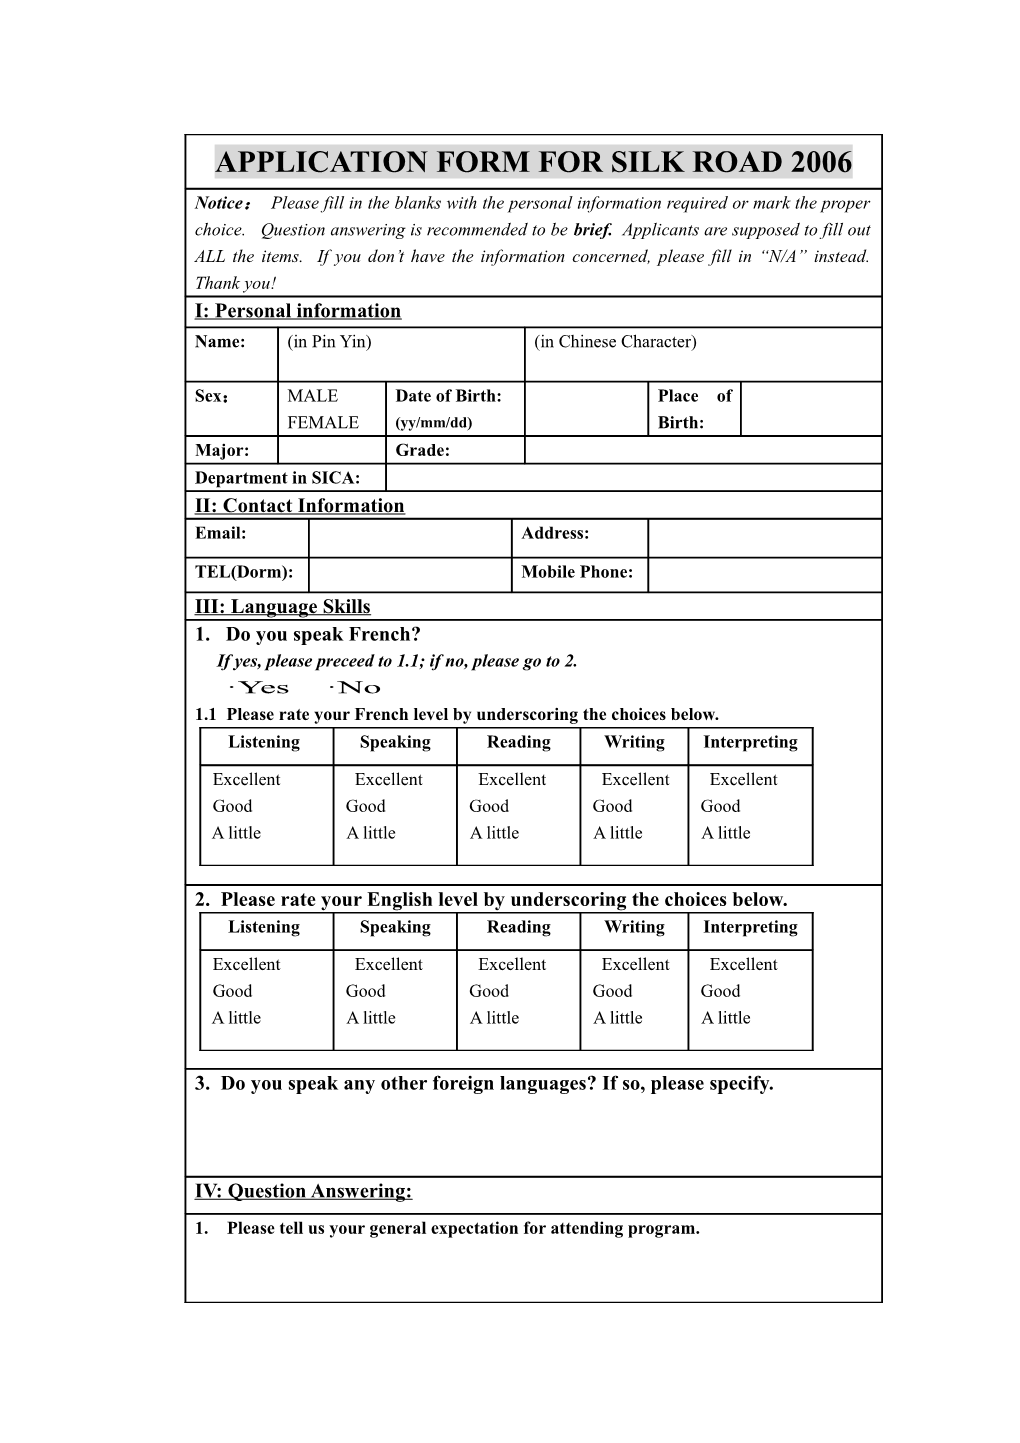 Application Form for Silk Road 2006